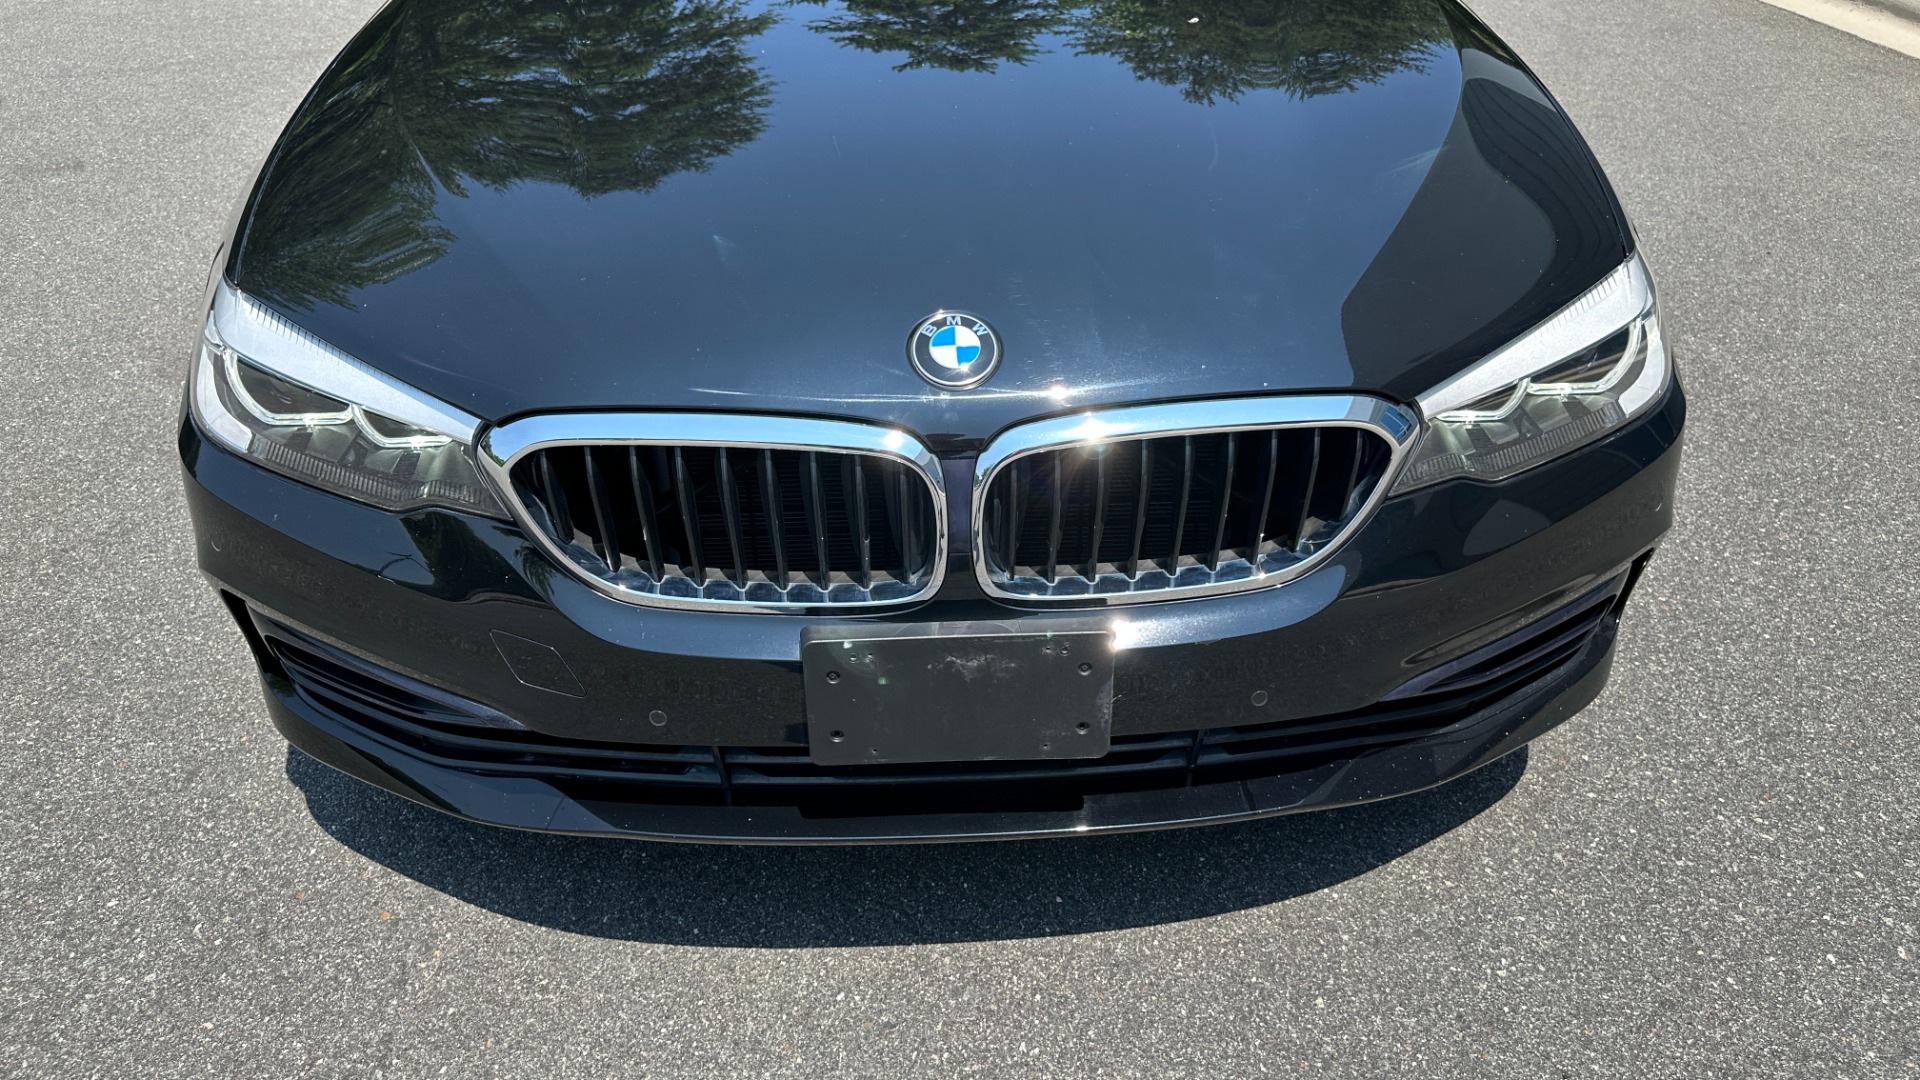 Used 2019 BMW 5 Series 530i xDrive / HEATED SEATS / NAV / SUNROOF / REARVIEW CAMERA for sale $30,795 at Formula Imports in Charlotte NC 28227 8